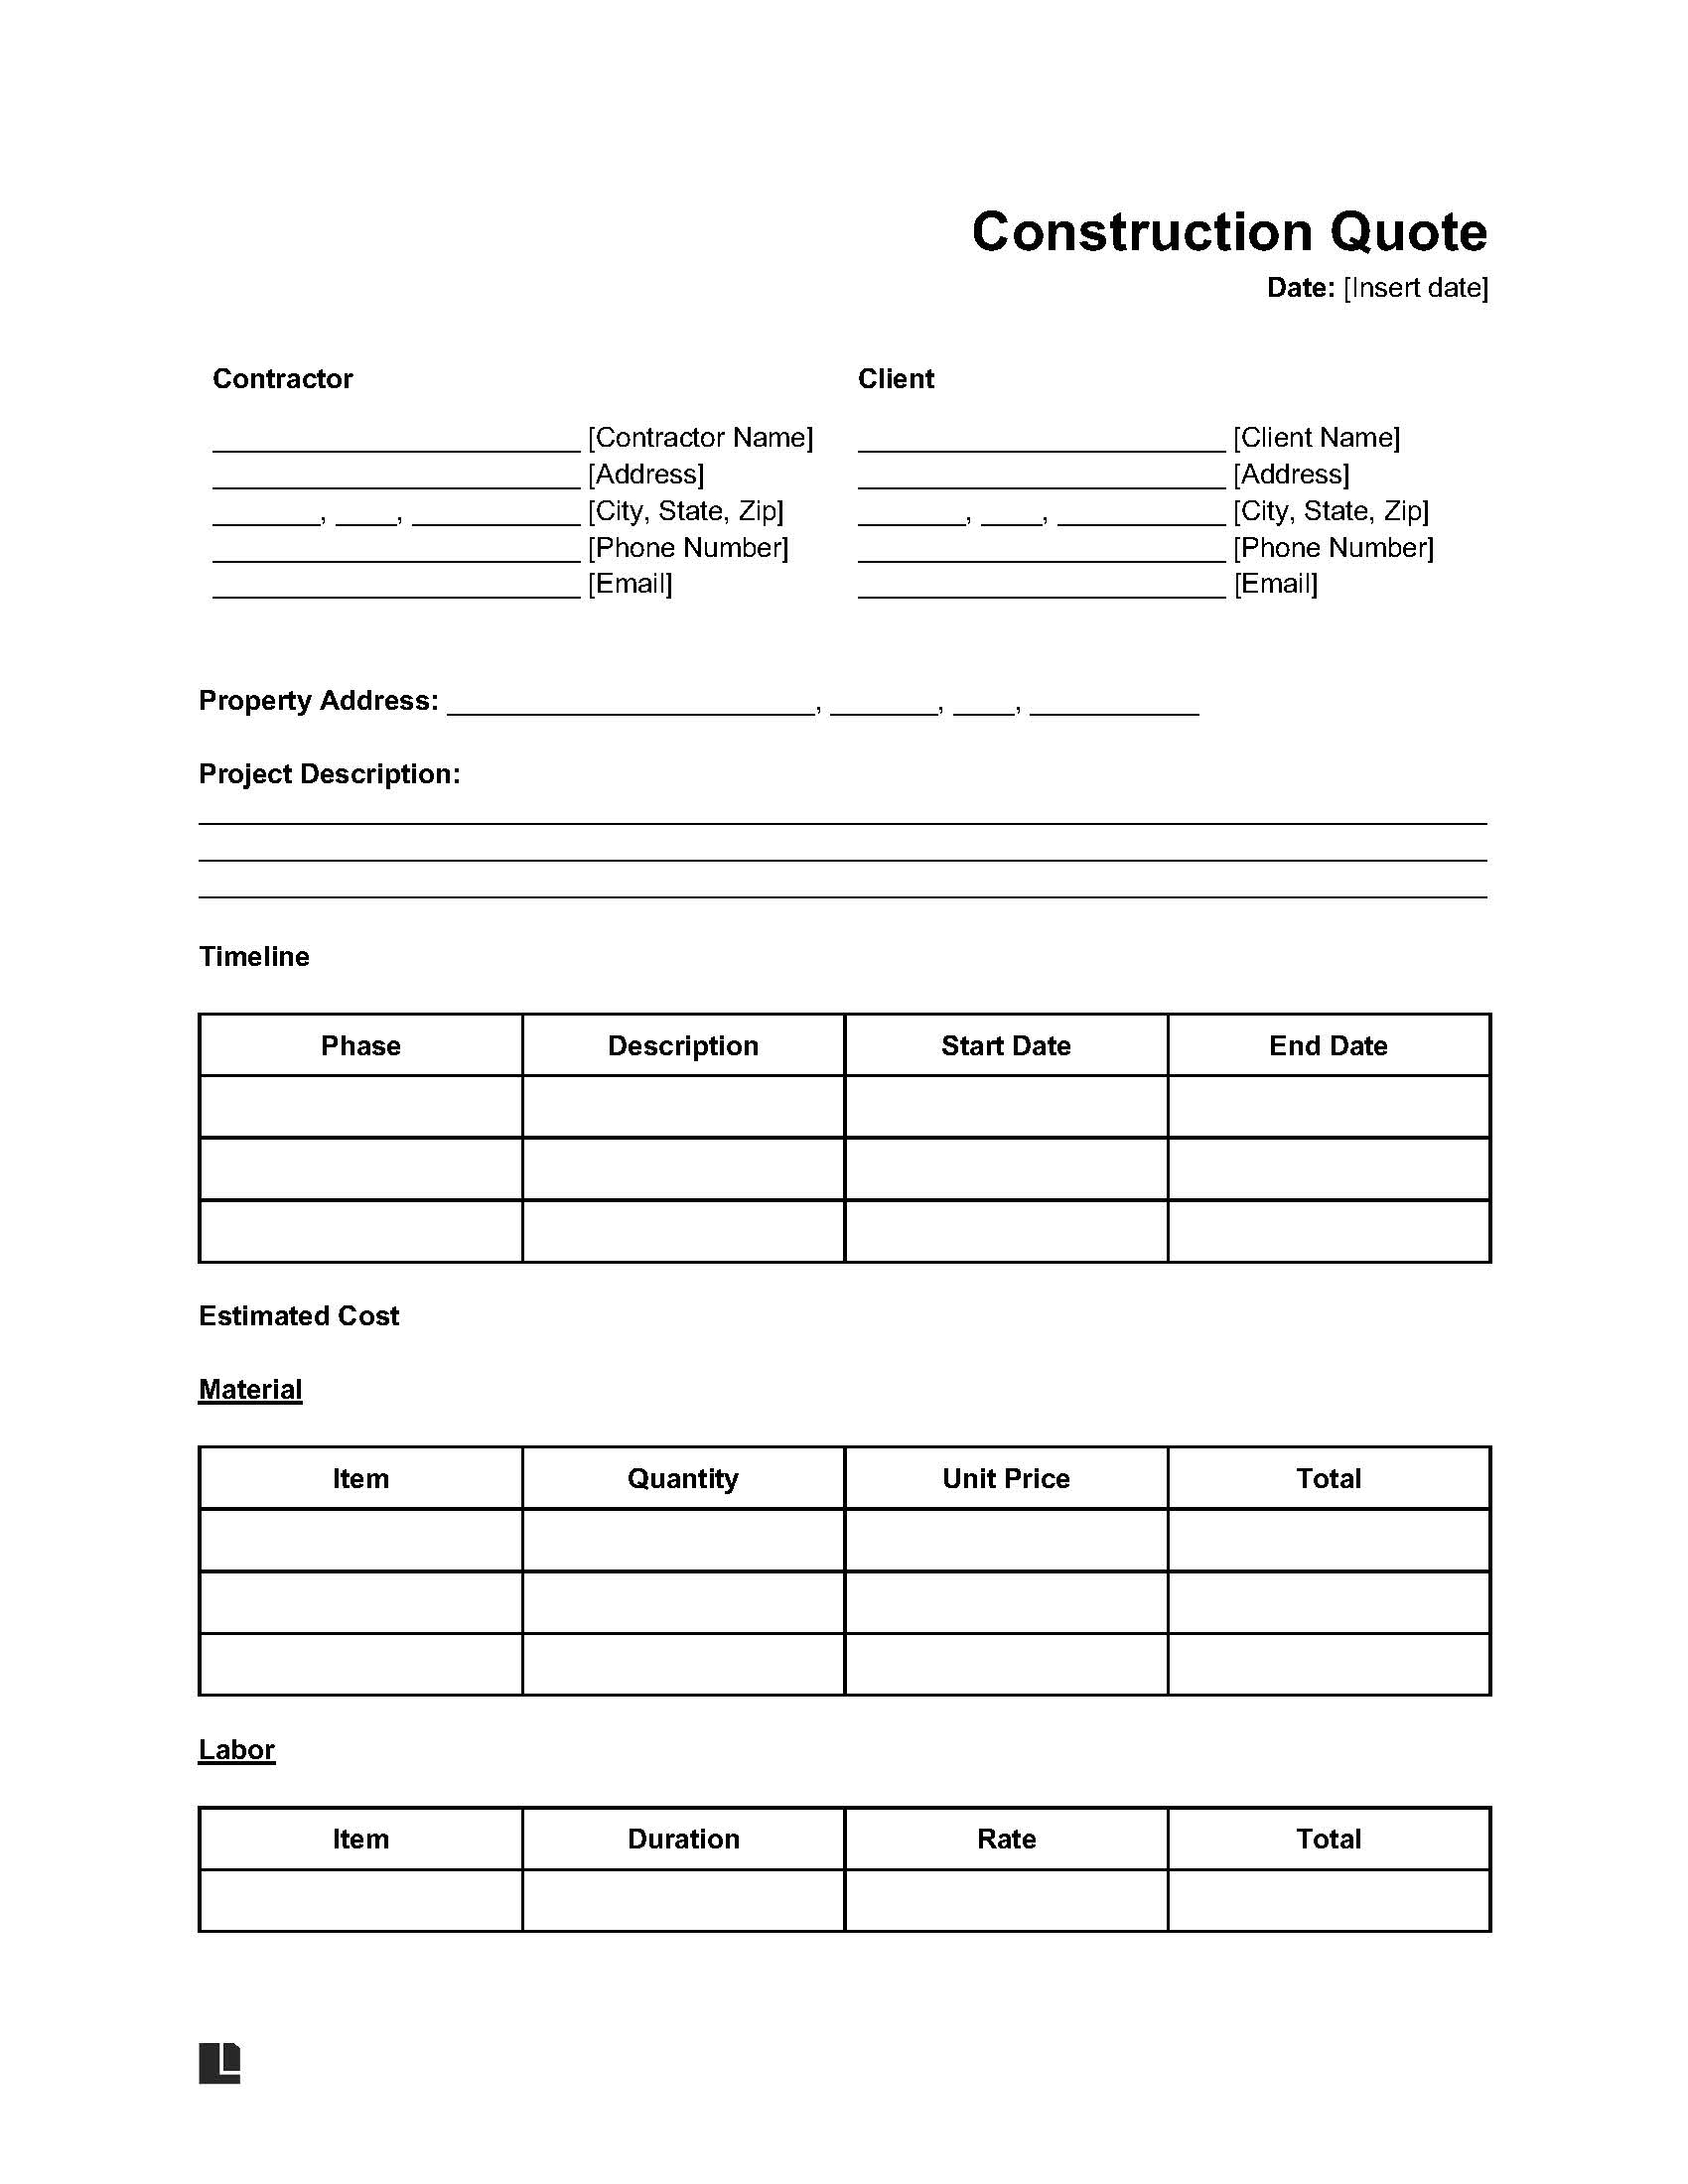 construction quote template